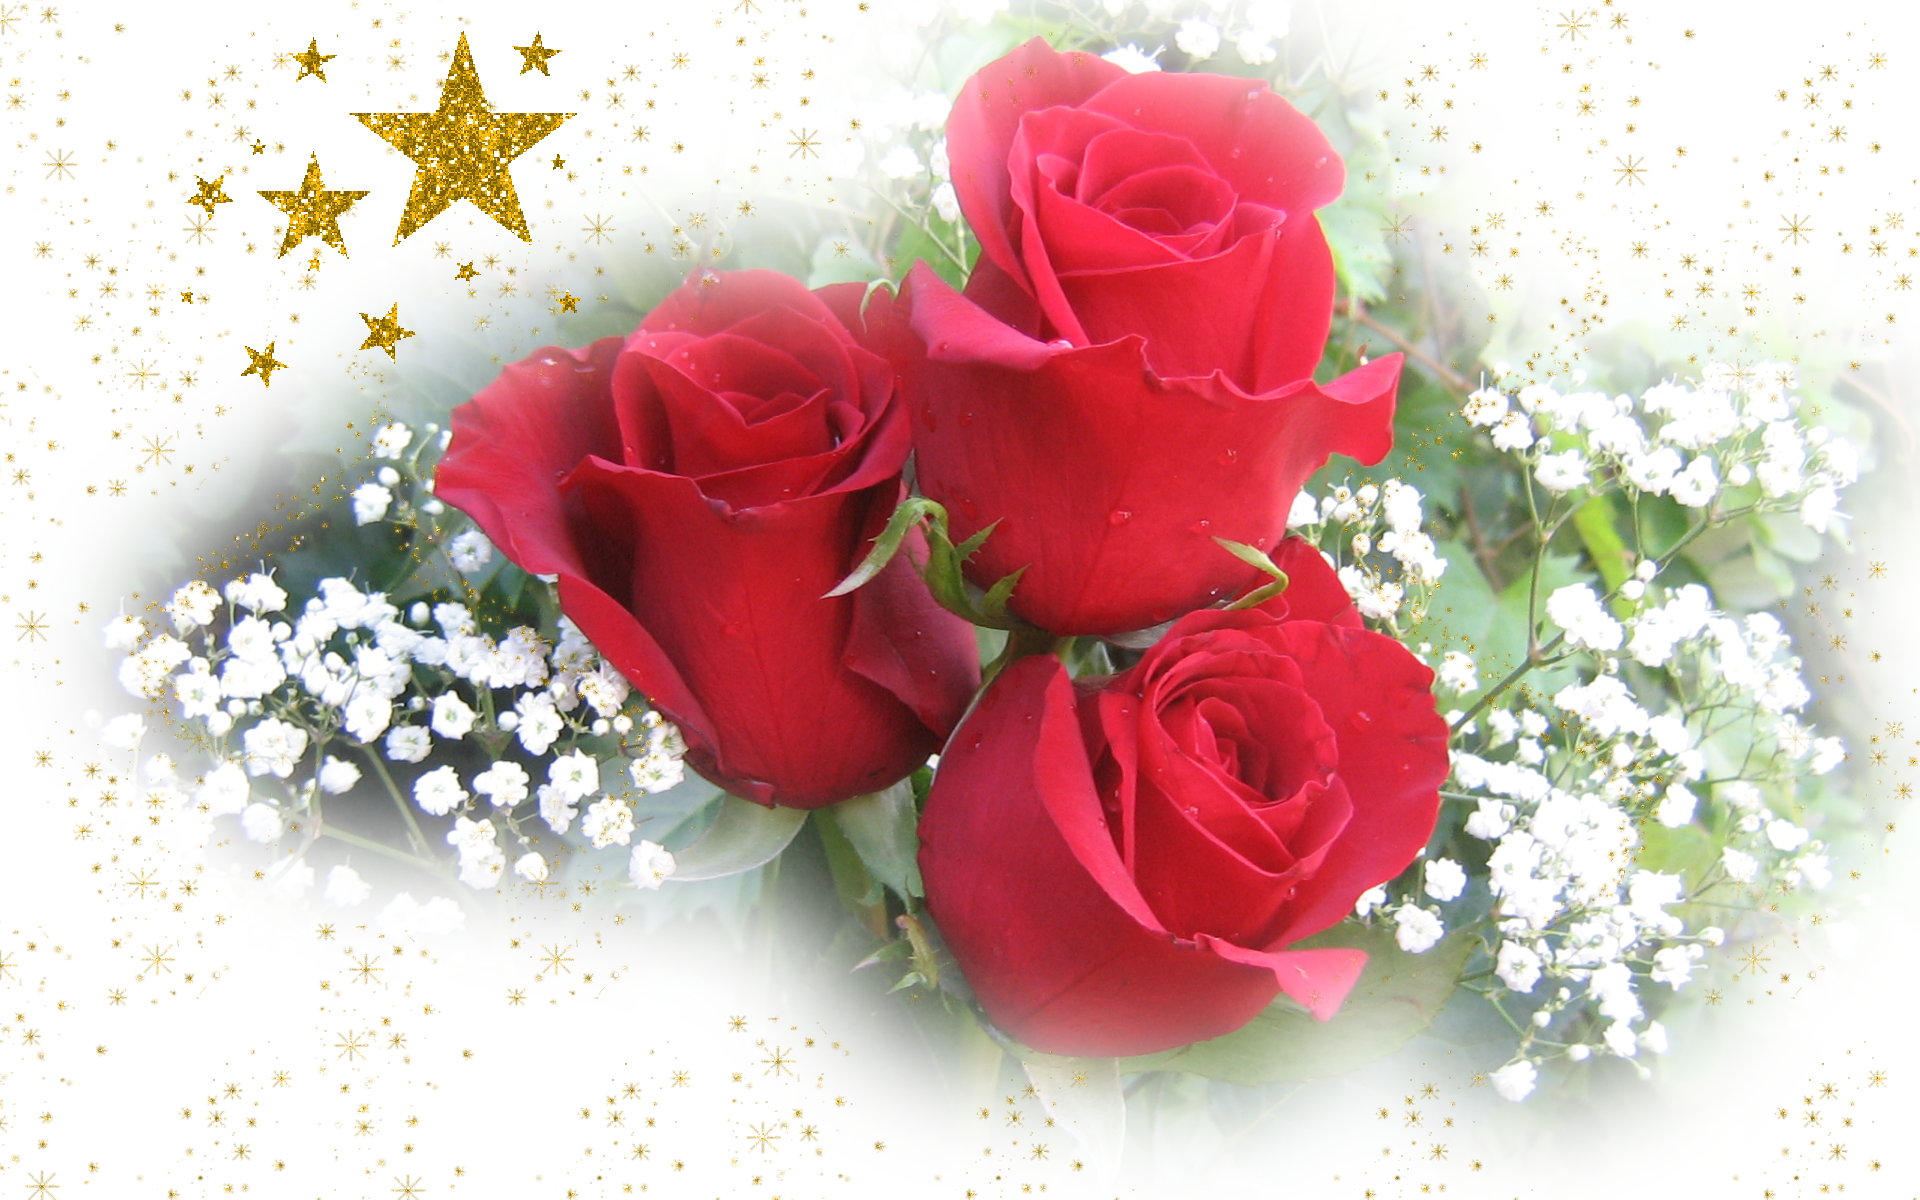 Merry Christmas wallpapers with beautiful roses and shiny stars